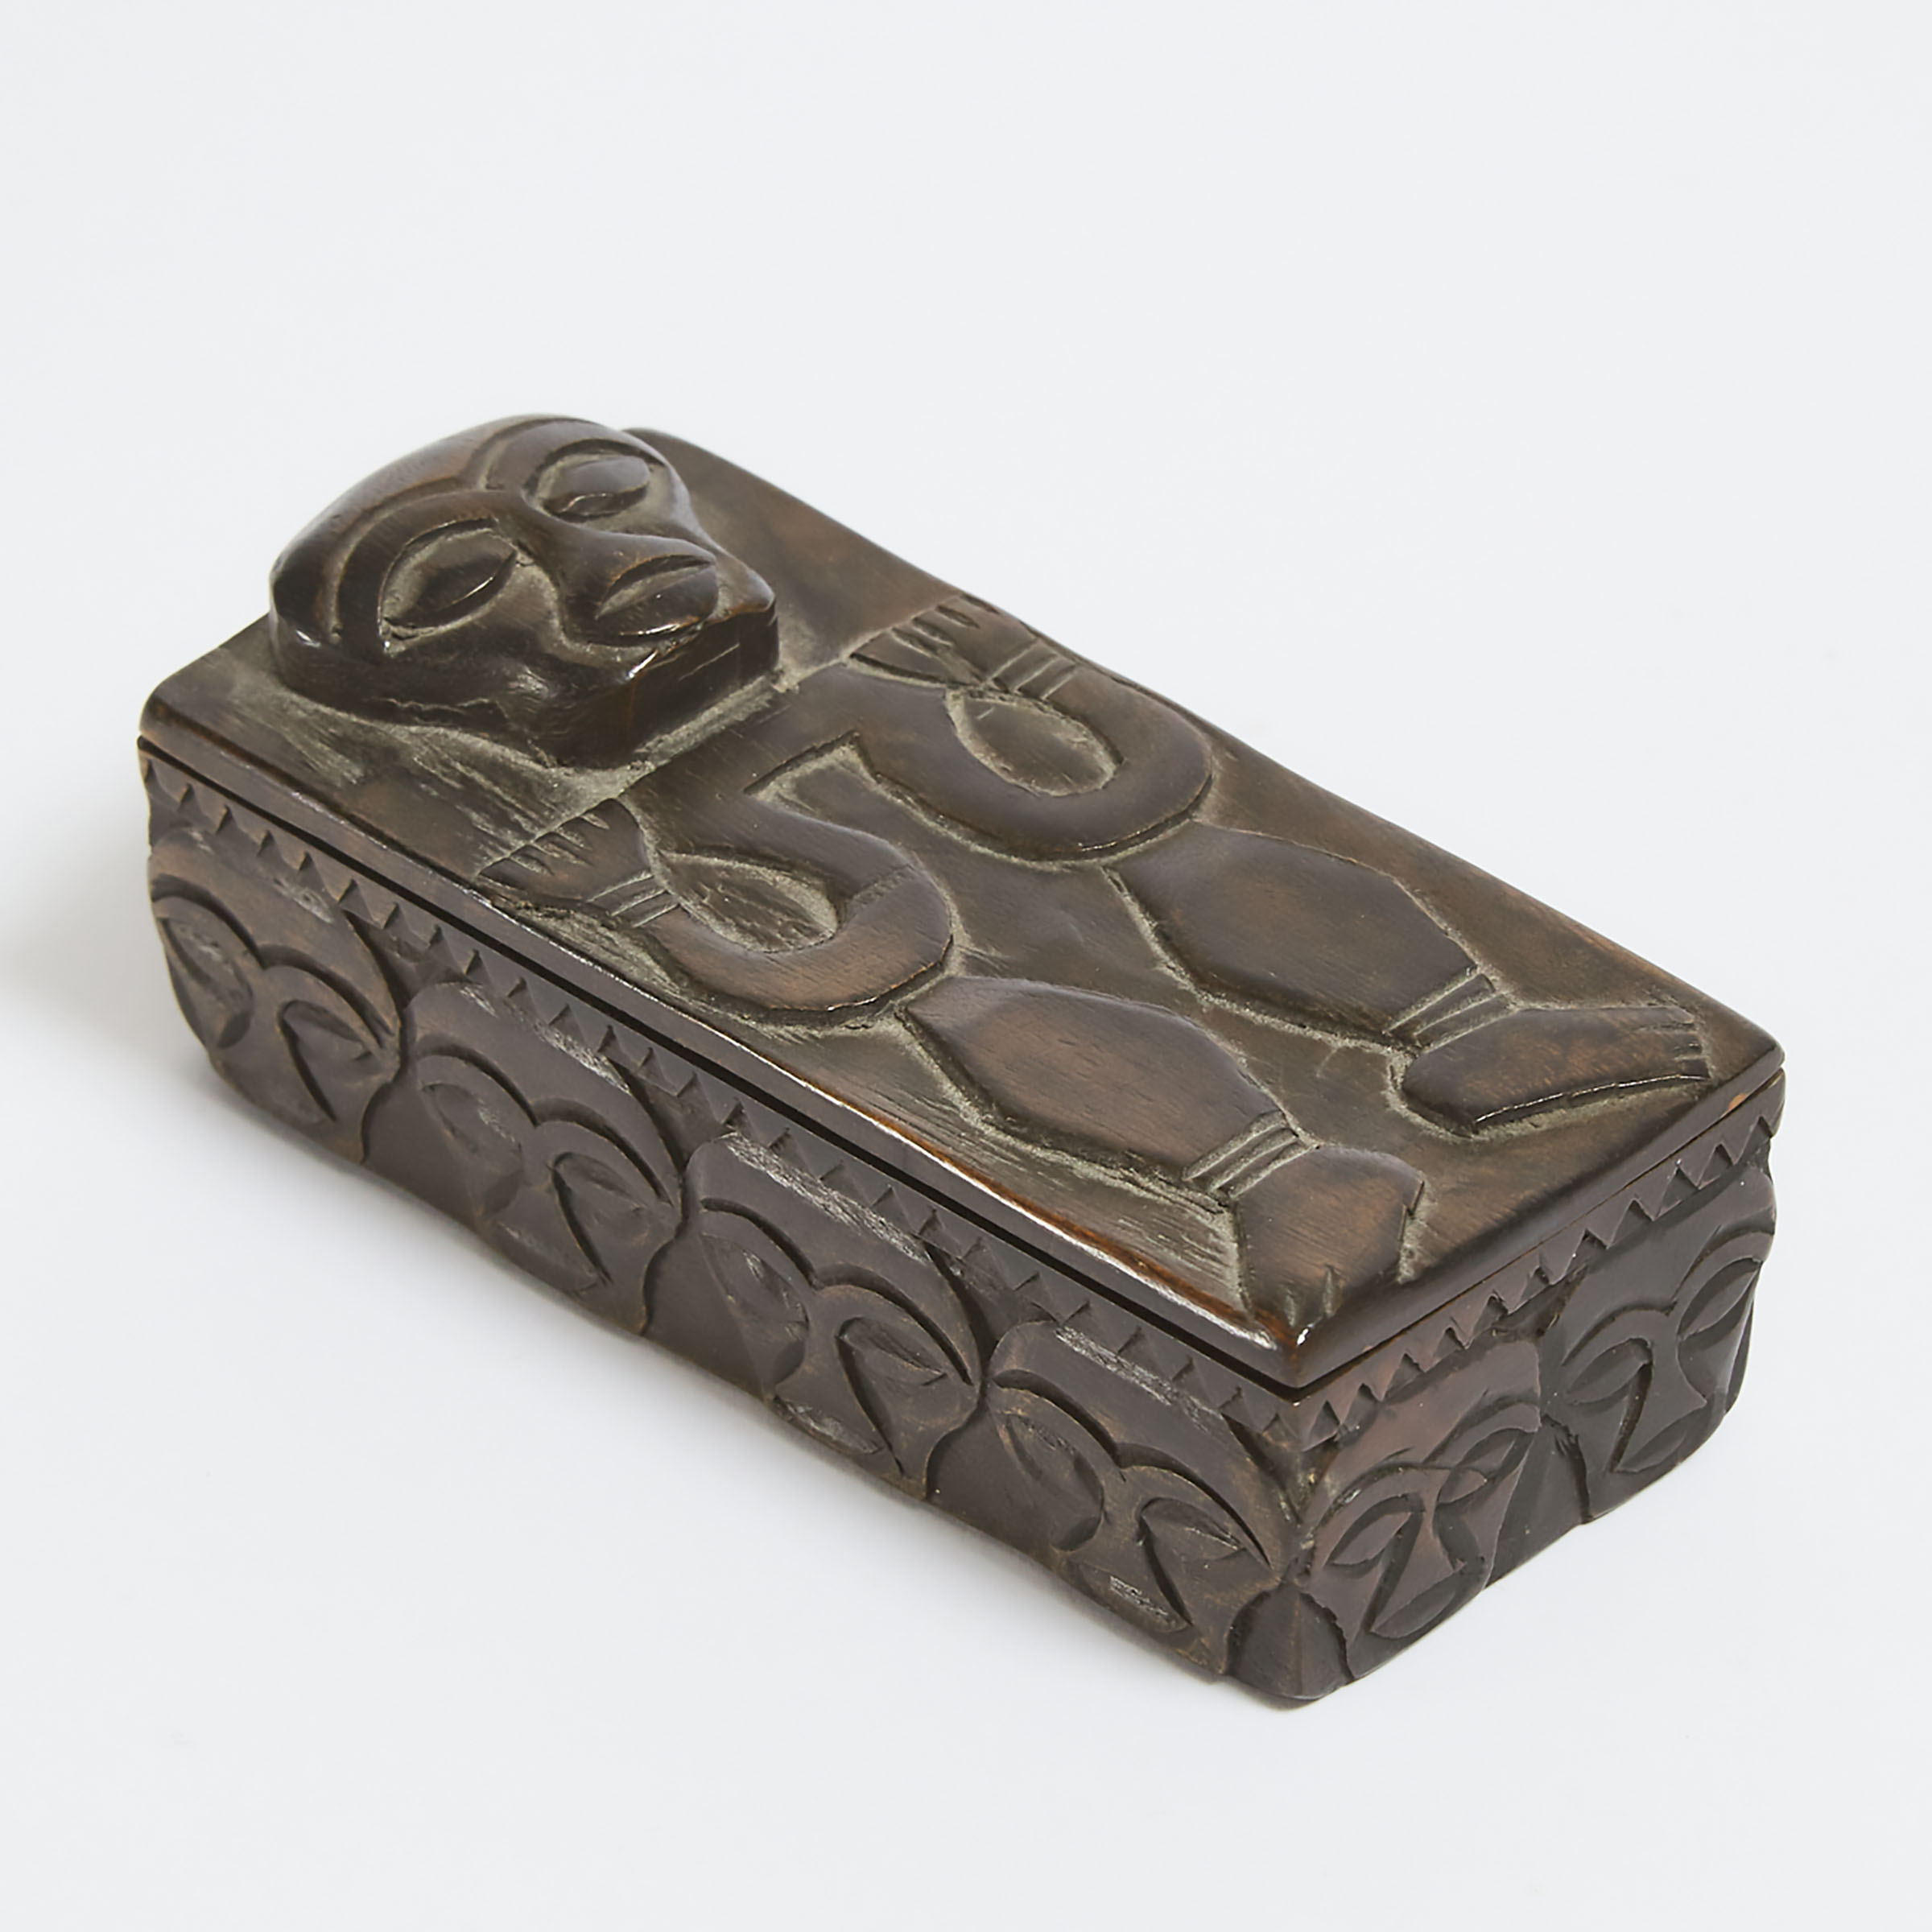 Indonesian Figural Lidded Box, possibly Iban/Dayak, Borneo, 20th century